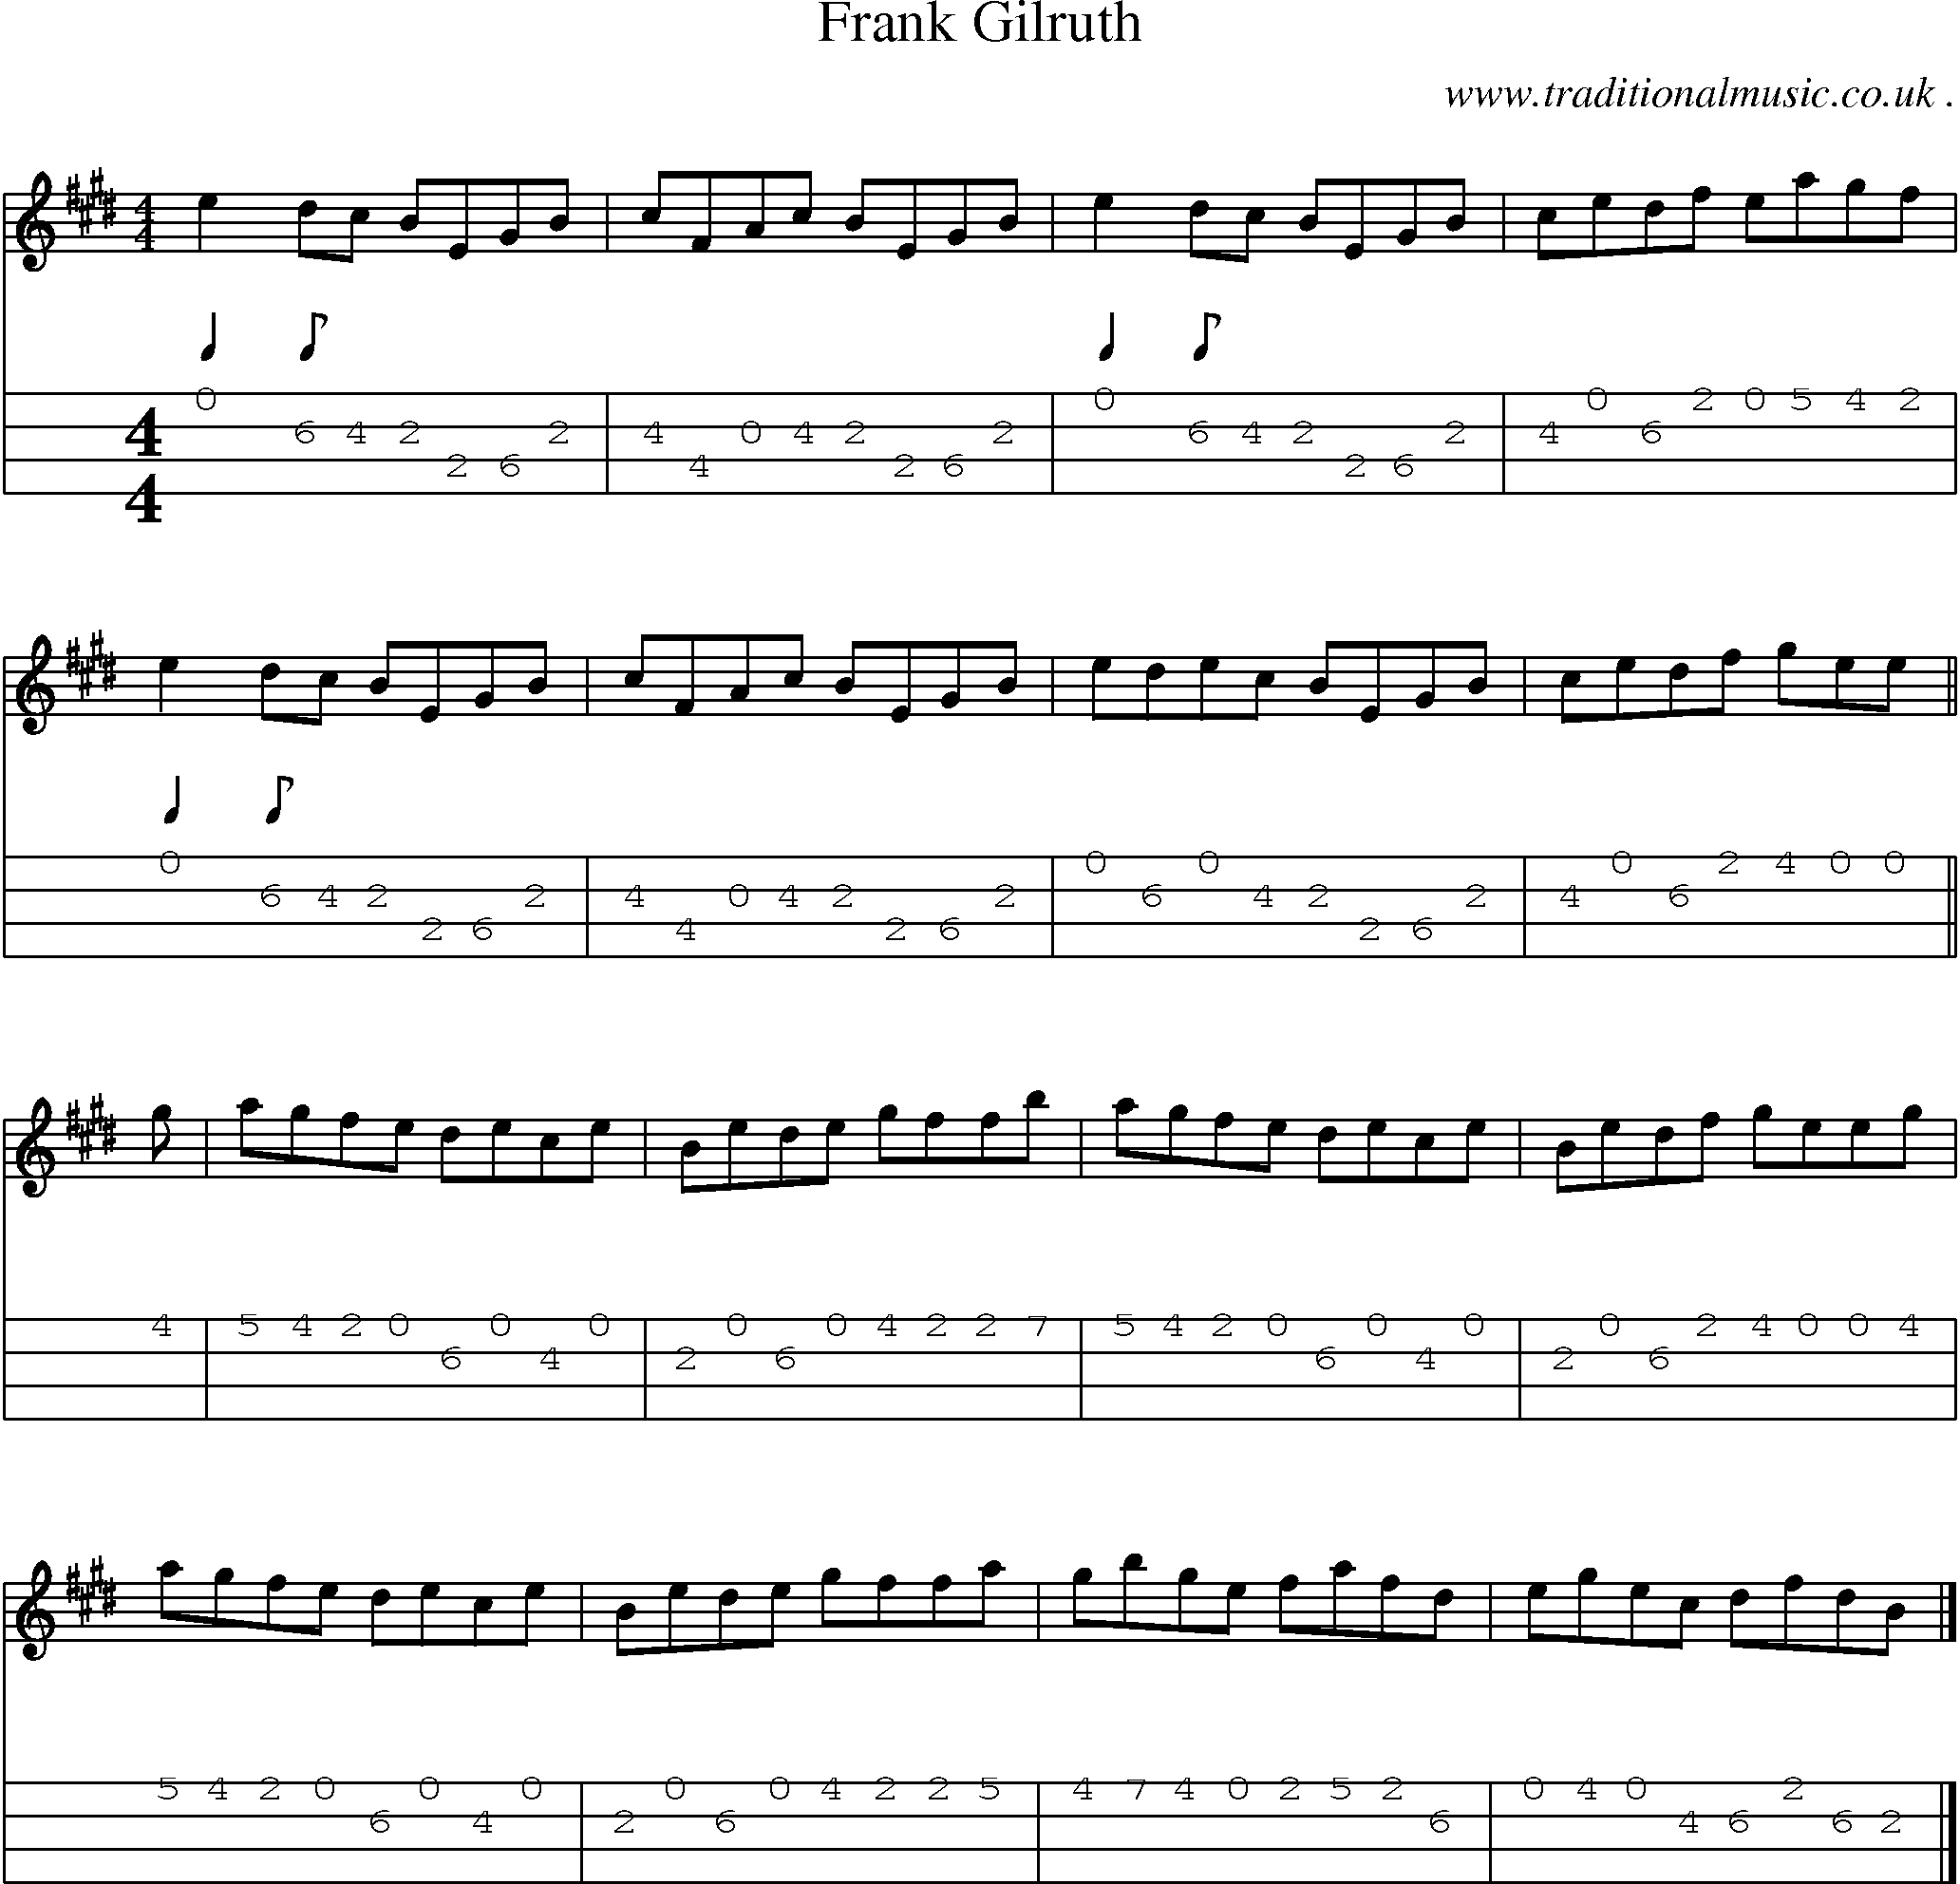 Sheet-music  score, Chords and Mandolin Tabs for Frank Gilruth